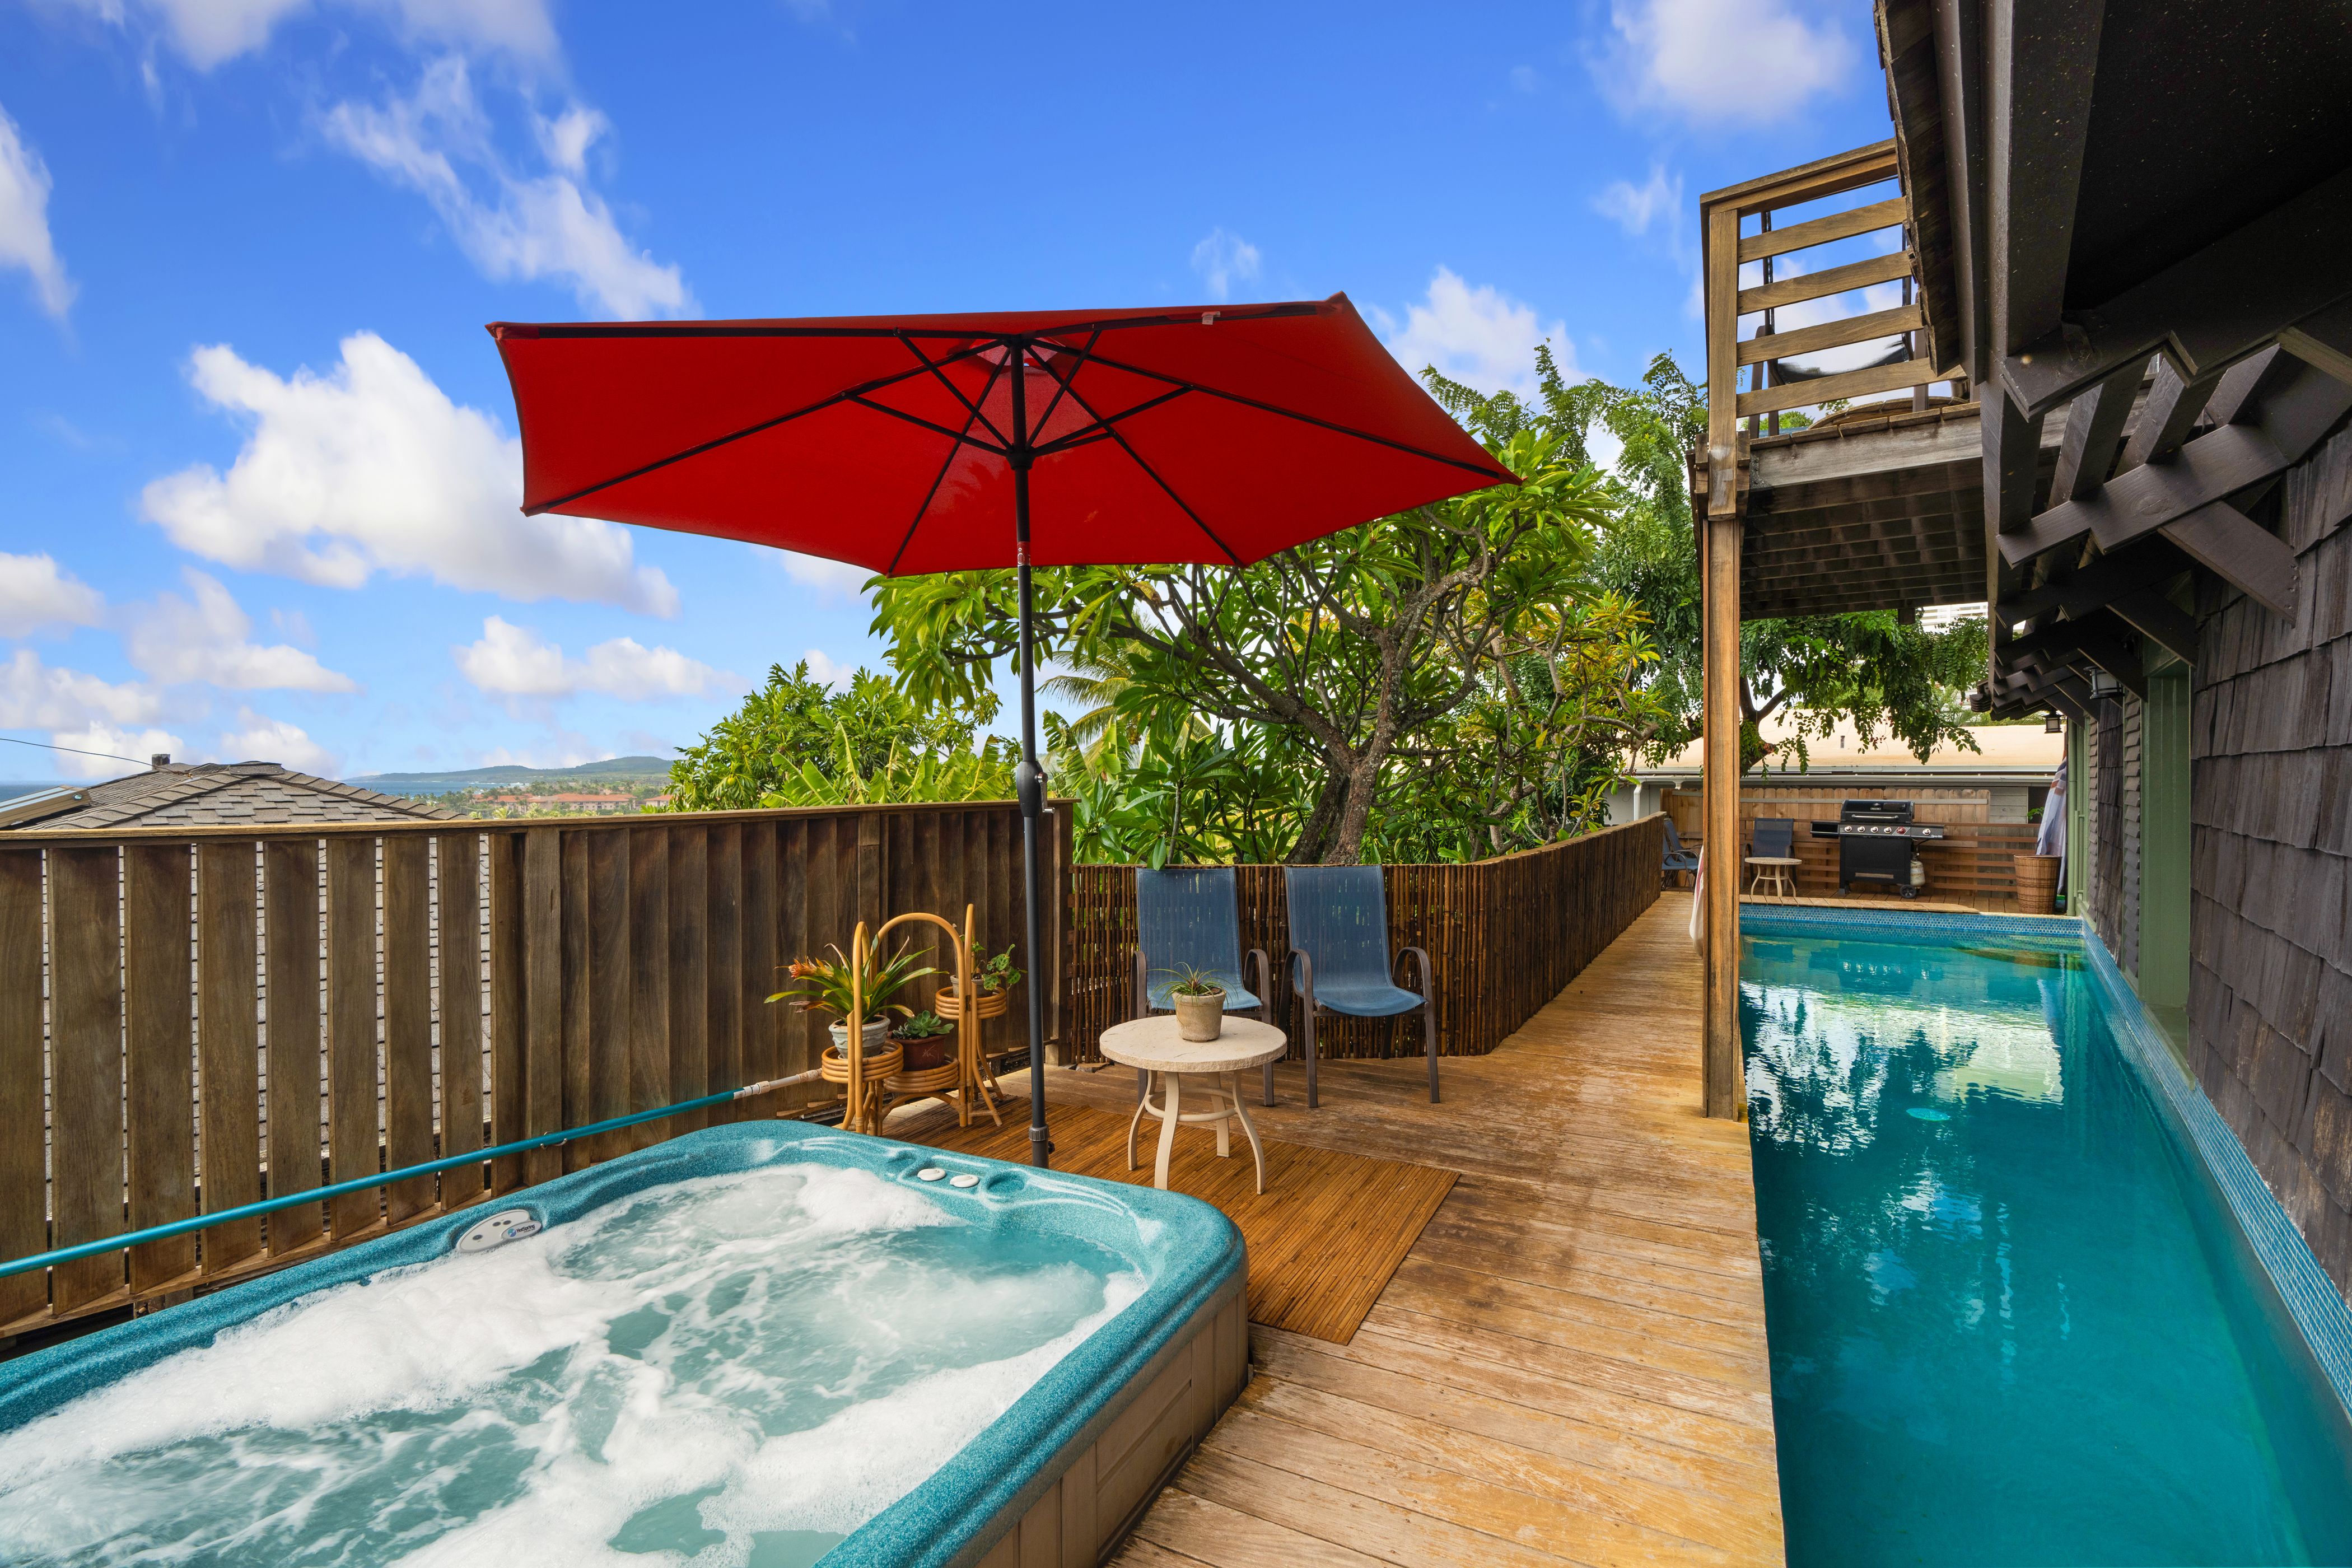 Amazing Views Hale hot tub views of the Pacific Coastline and Mountain Ridges. There is a towering Papaya tree located near the hot tub